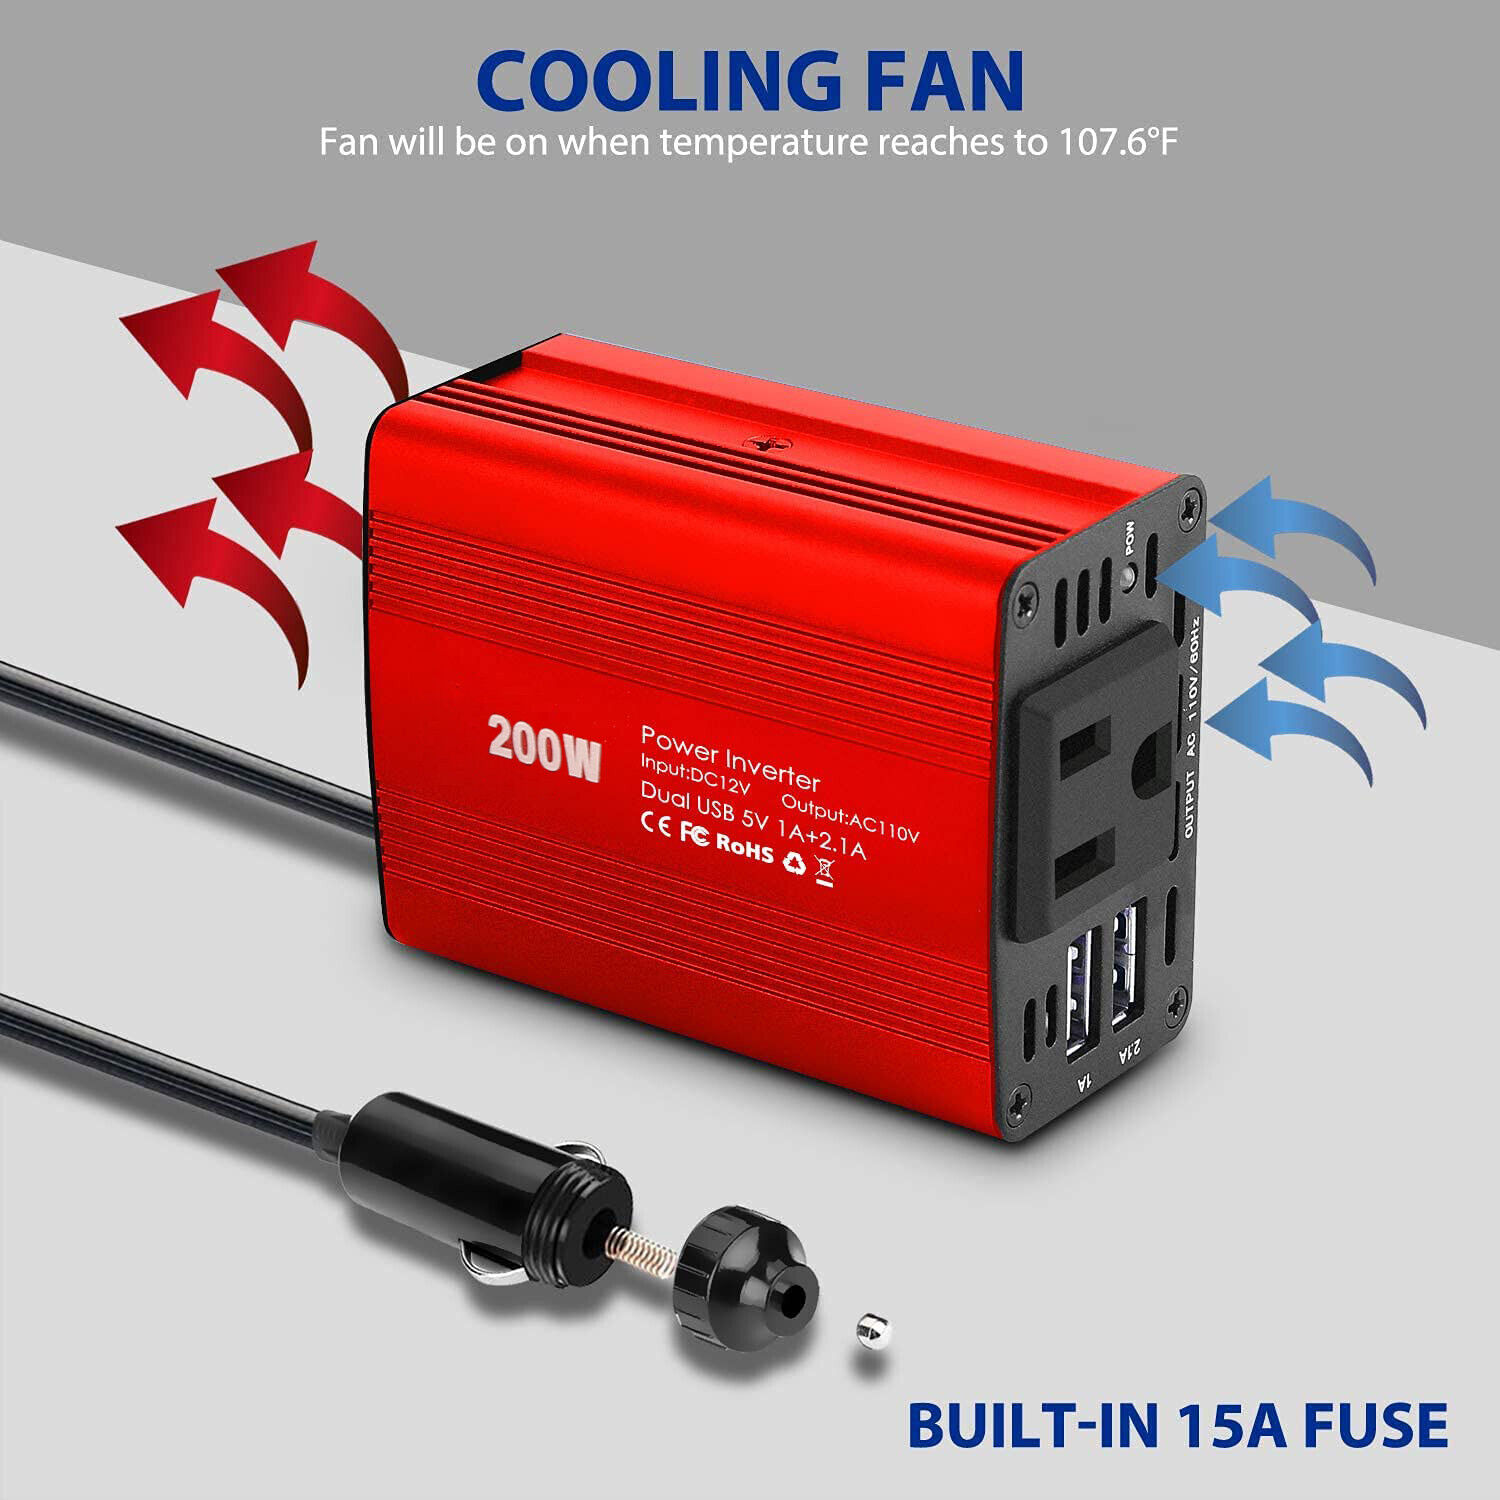 200W Car Power Inverter DC 12V to AC 110V 120V Converter Adapter Charger Outlet Powerextra Does Not Apply